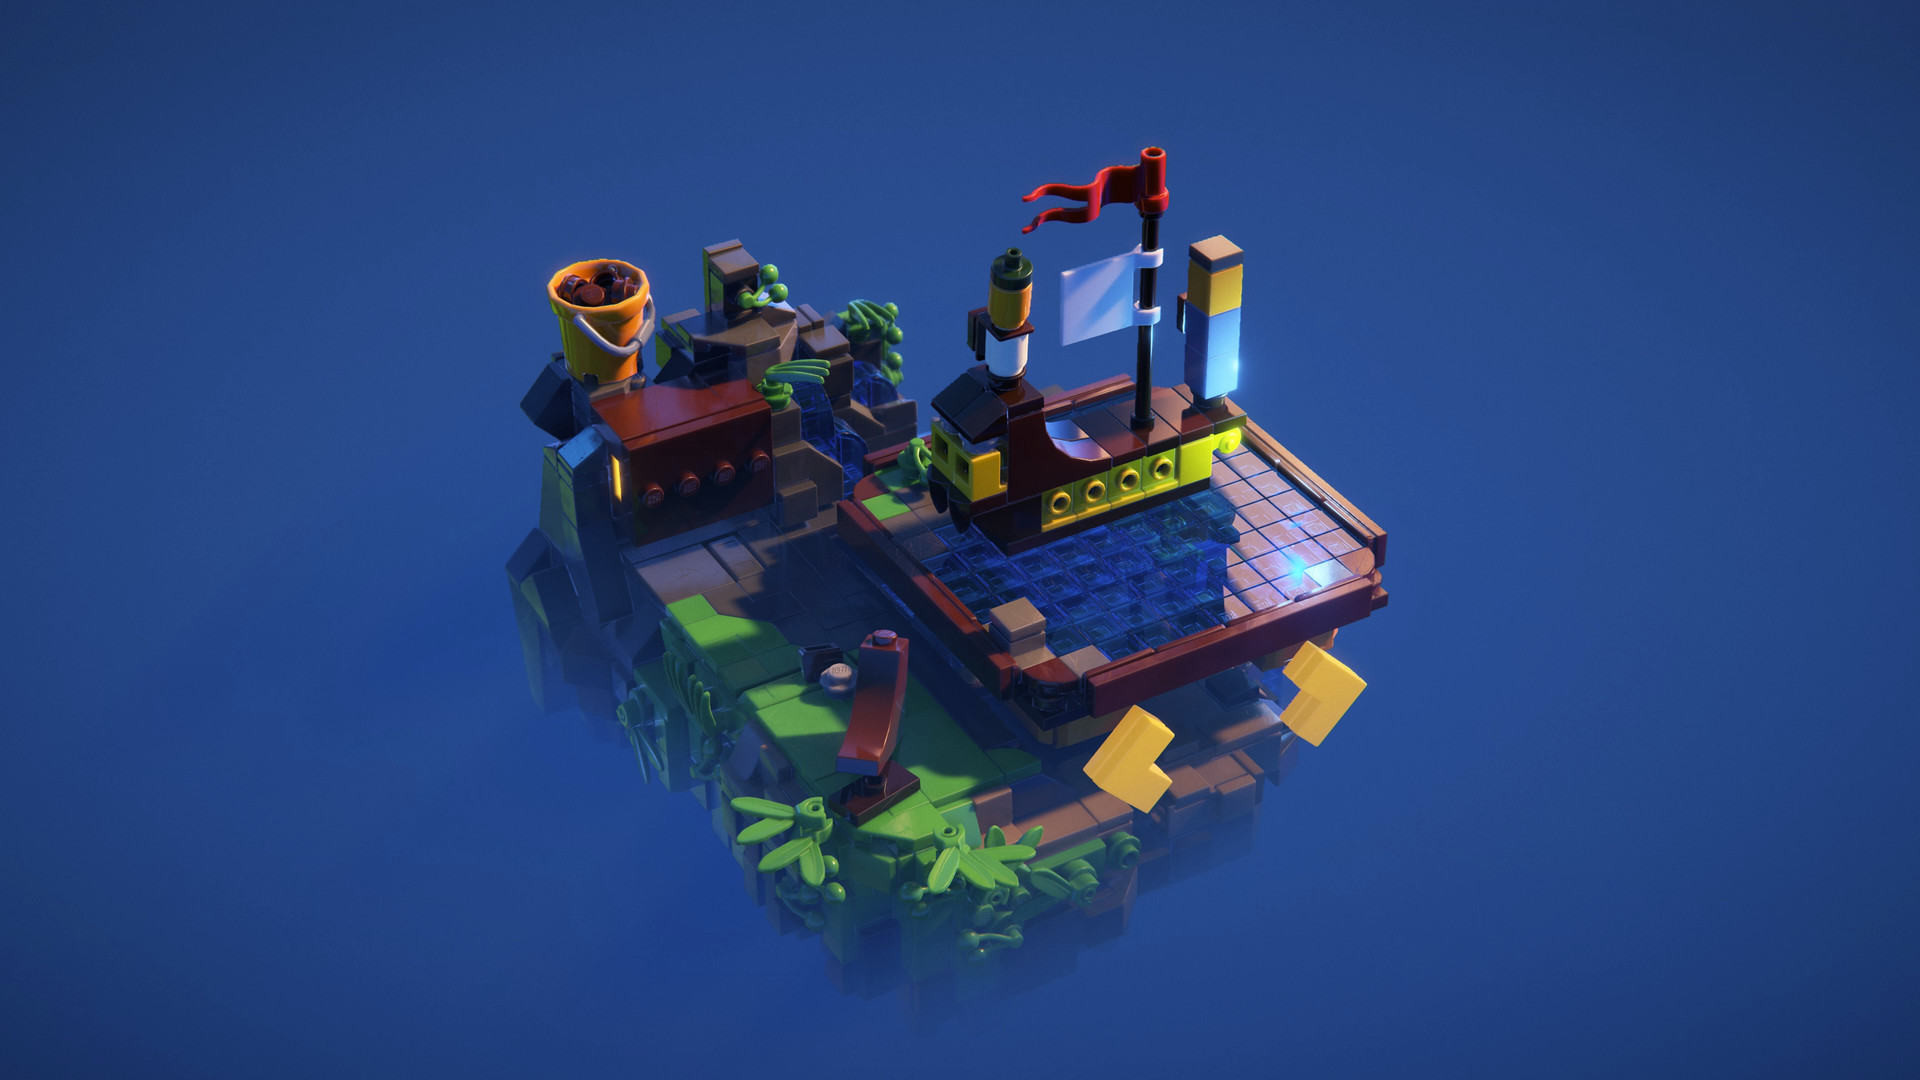 LEGO Builder's Journey is coming to PlayStation